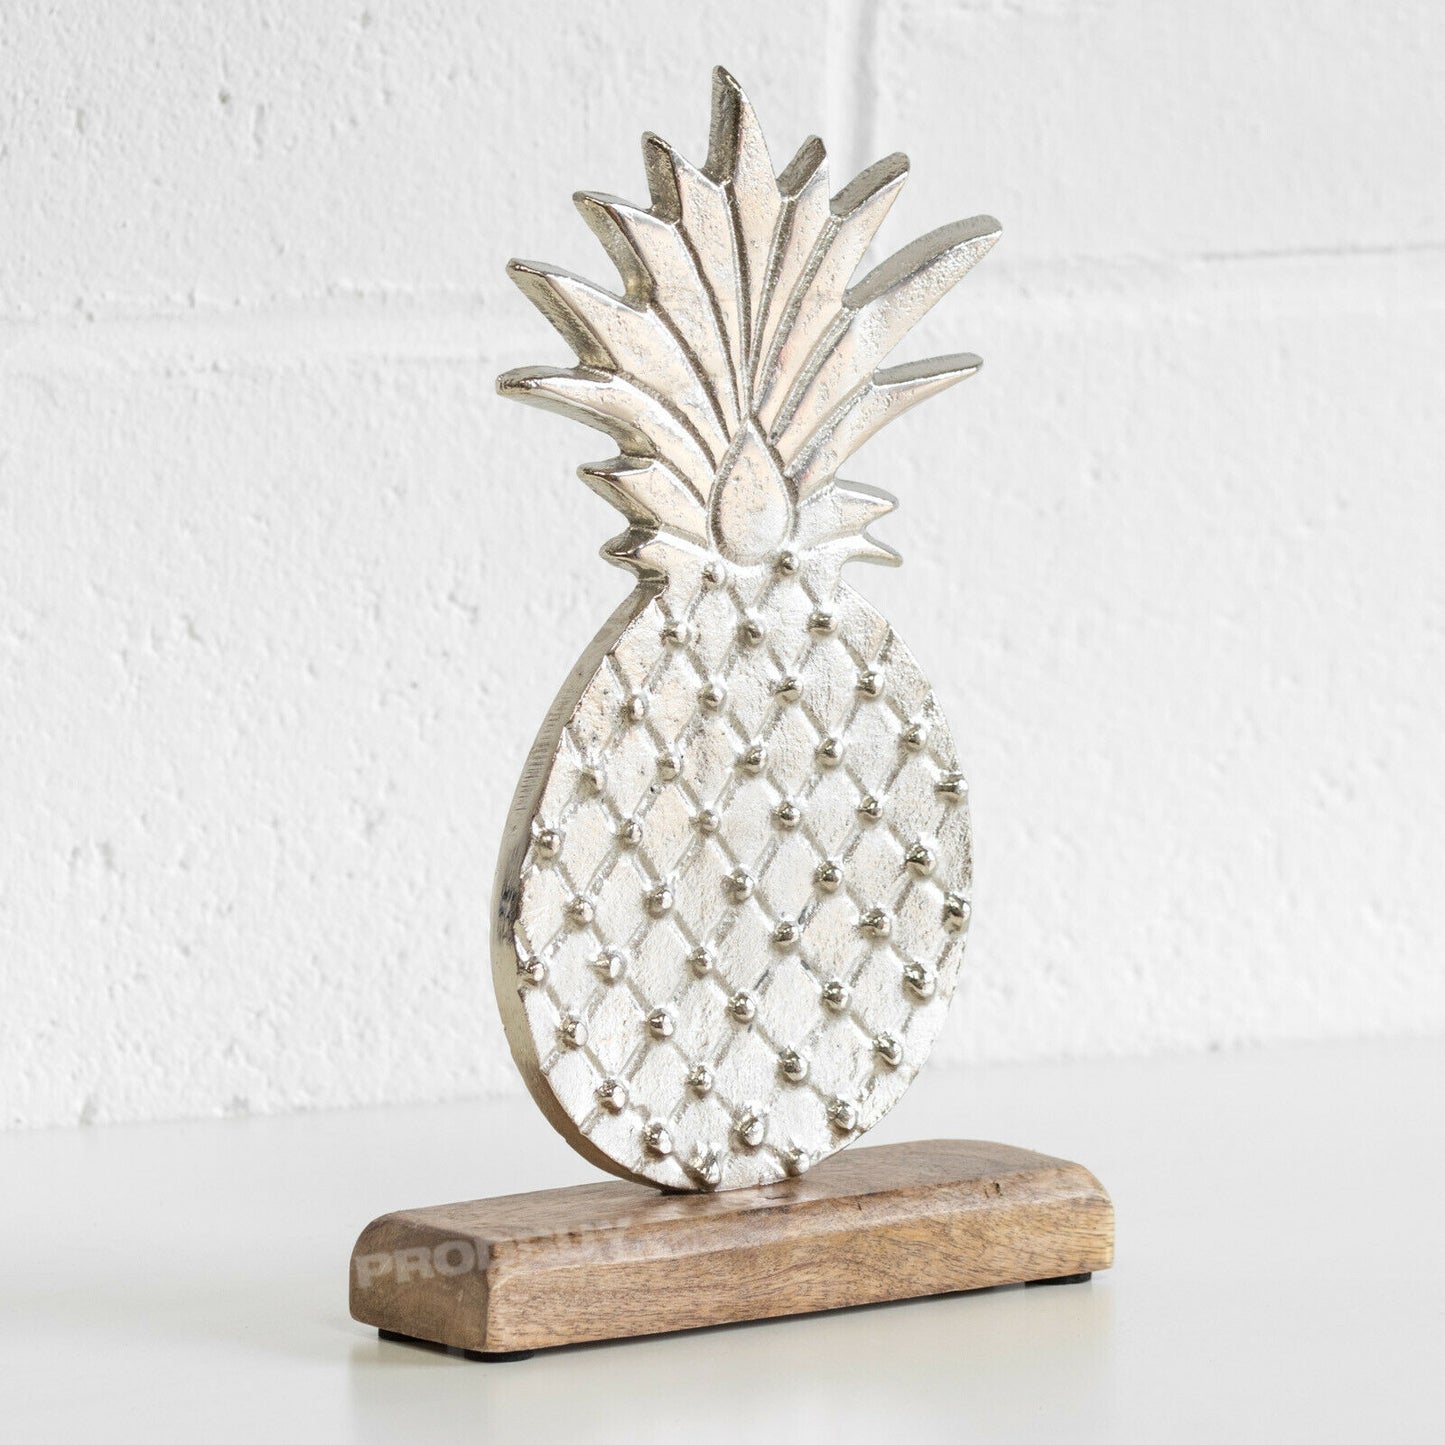 Silver Pineapple on Wooden Stand Decorative Ornament